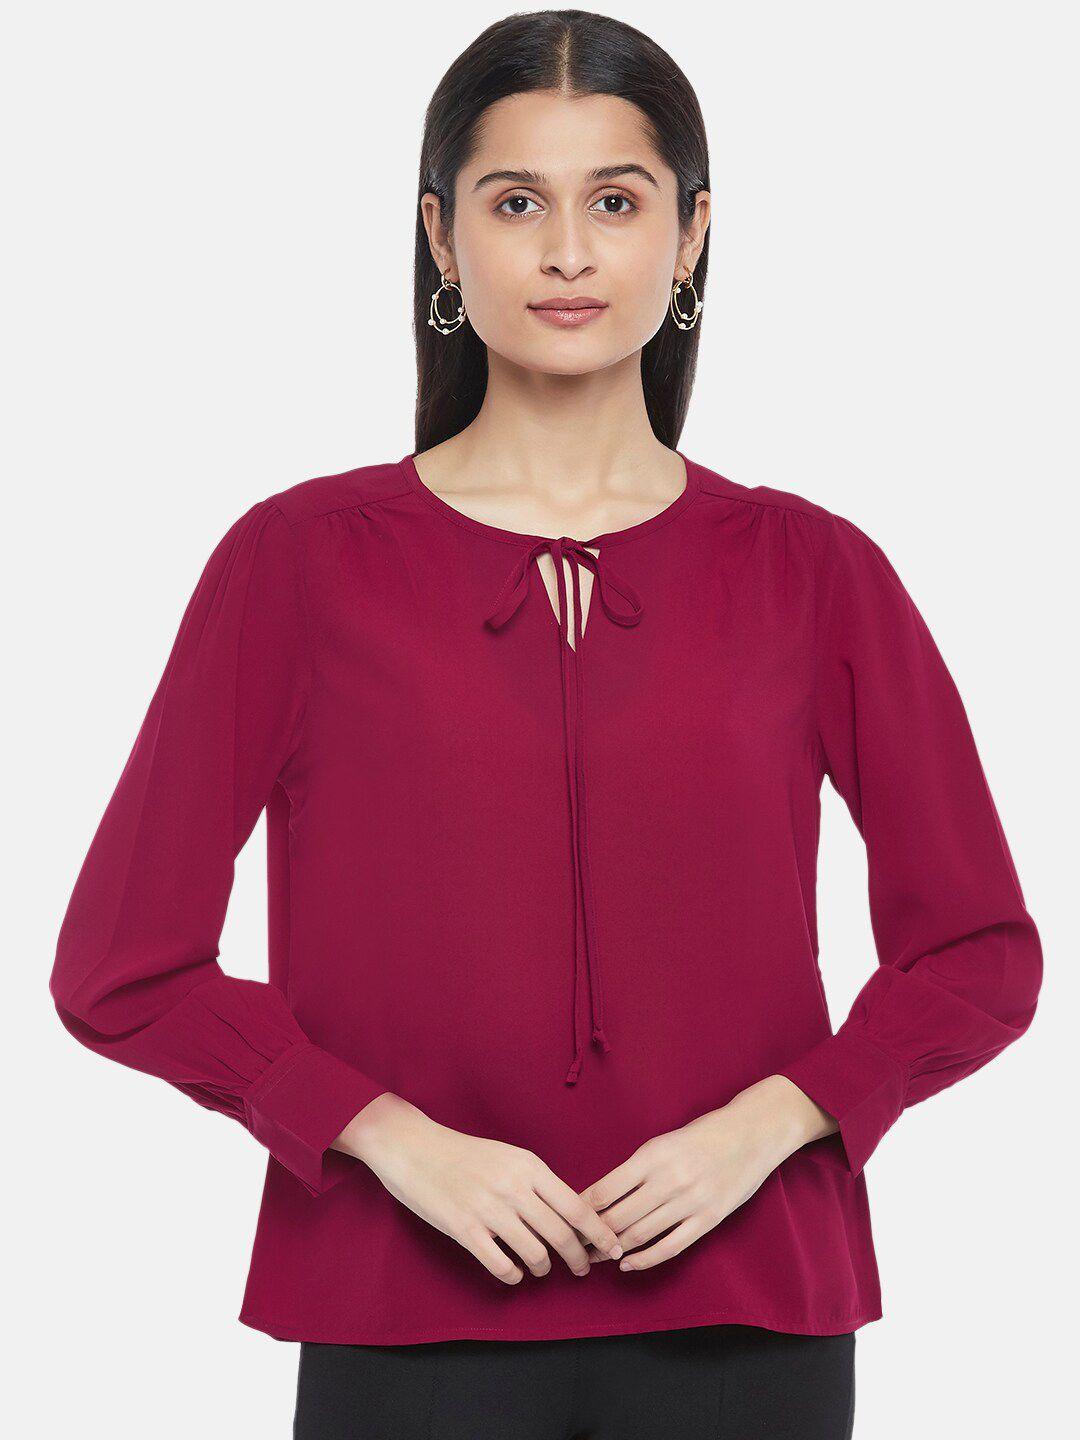 annabelle by pantaloons women maroon keyhole neck top